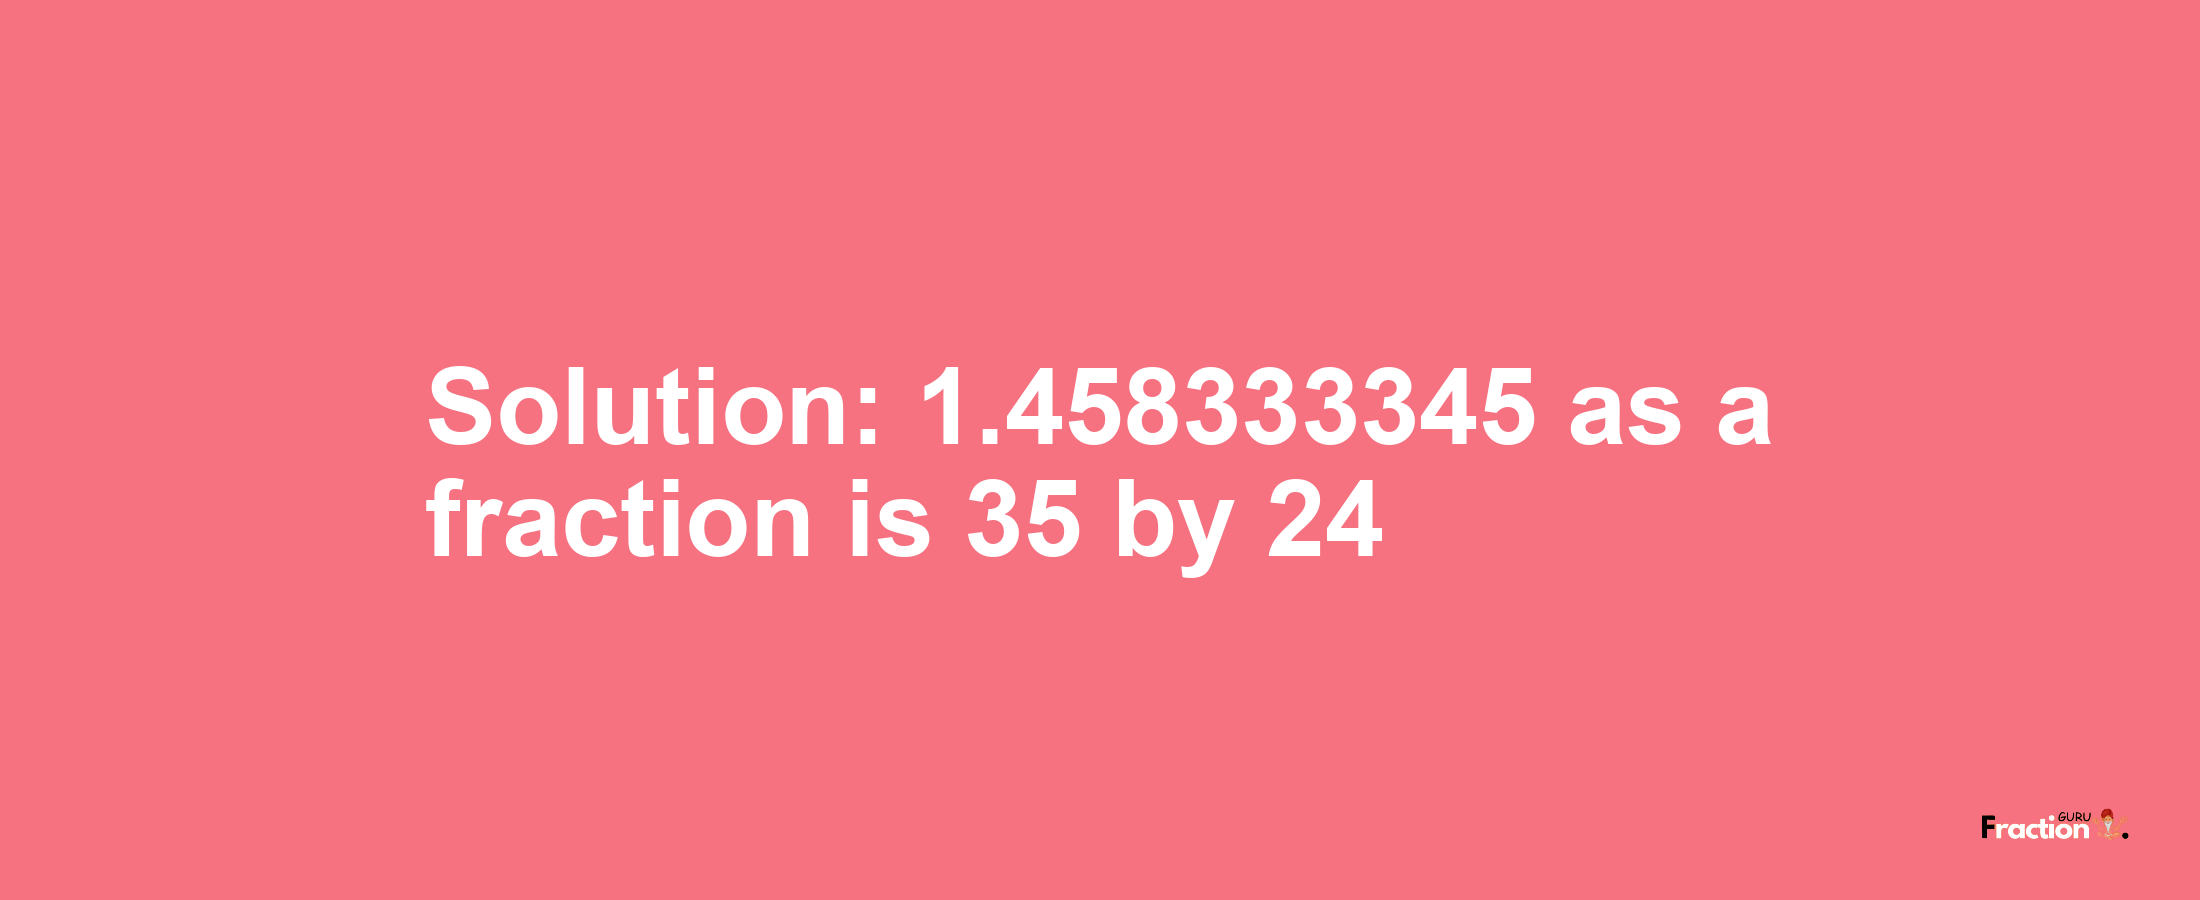 Solution:1.458333345 as a fraction is 35/24